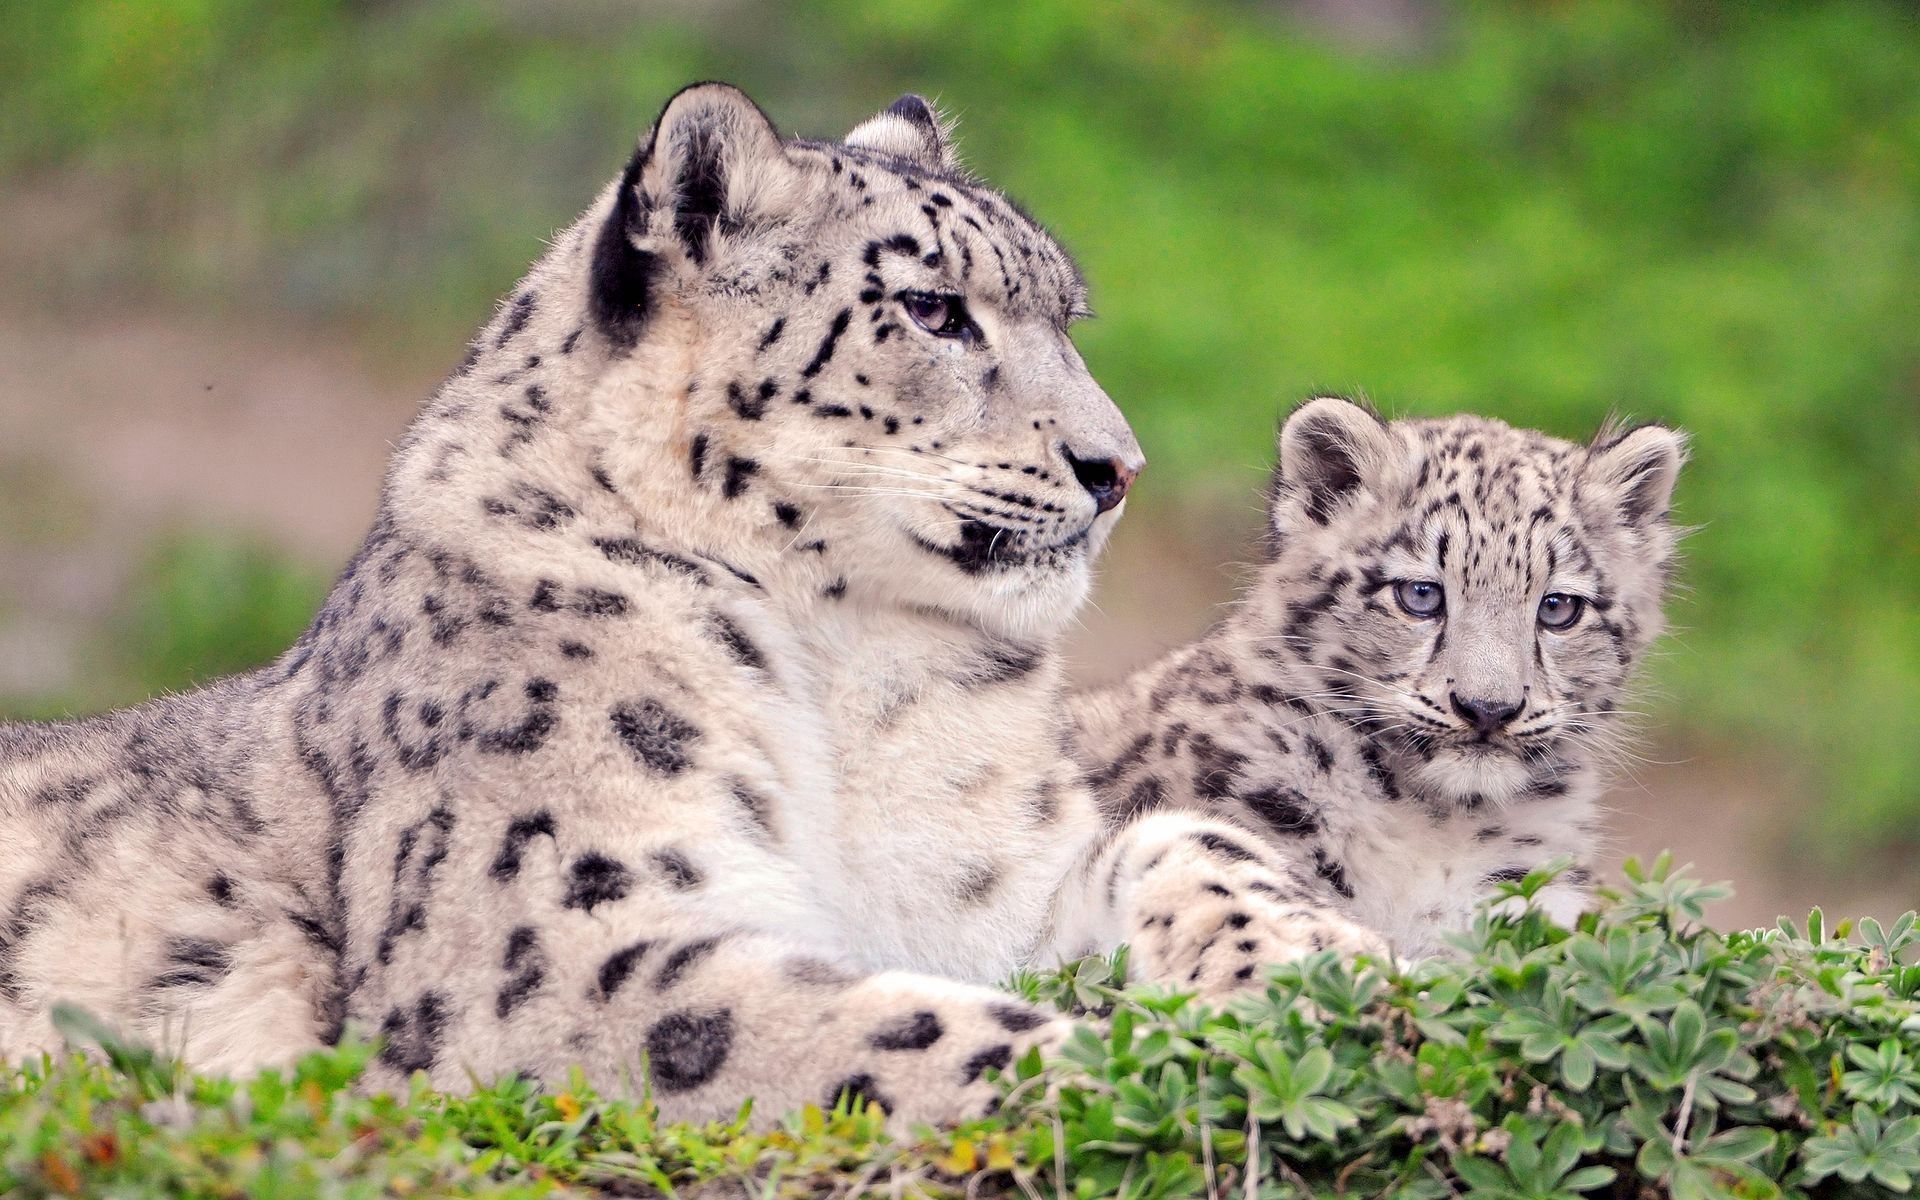 couple, animals, grass, snow leopard, sit, young, pair, joey UHD